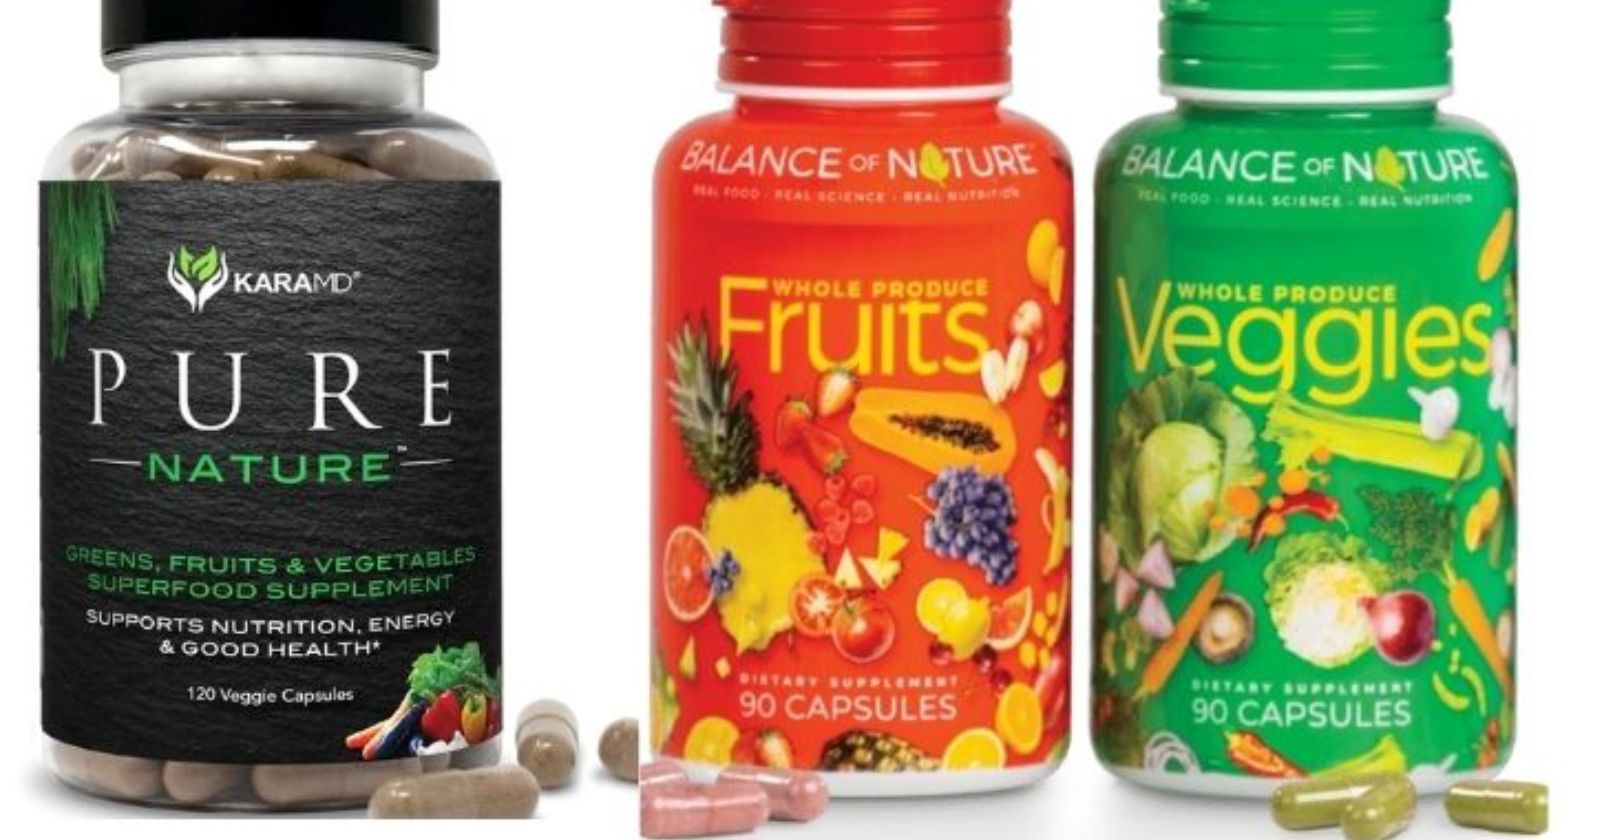 Balance of Nature vs Pure Nature: Comparing Supplements